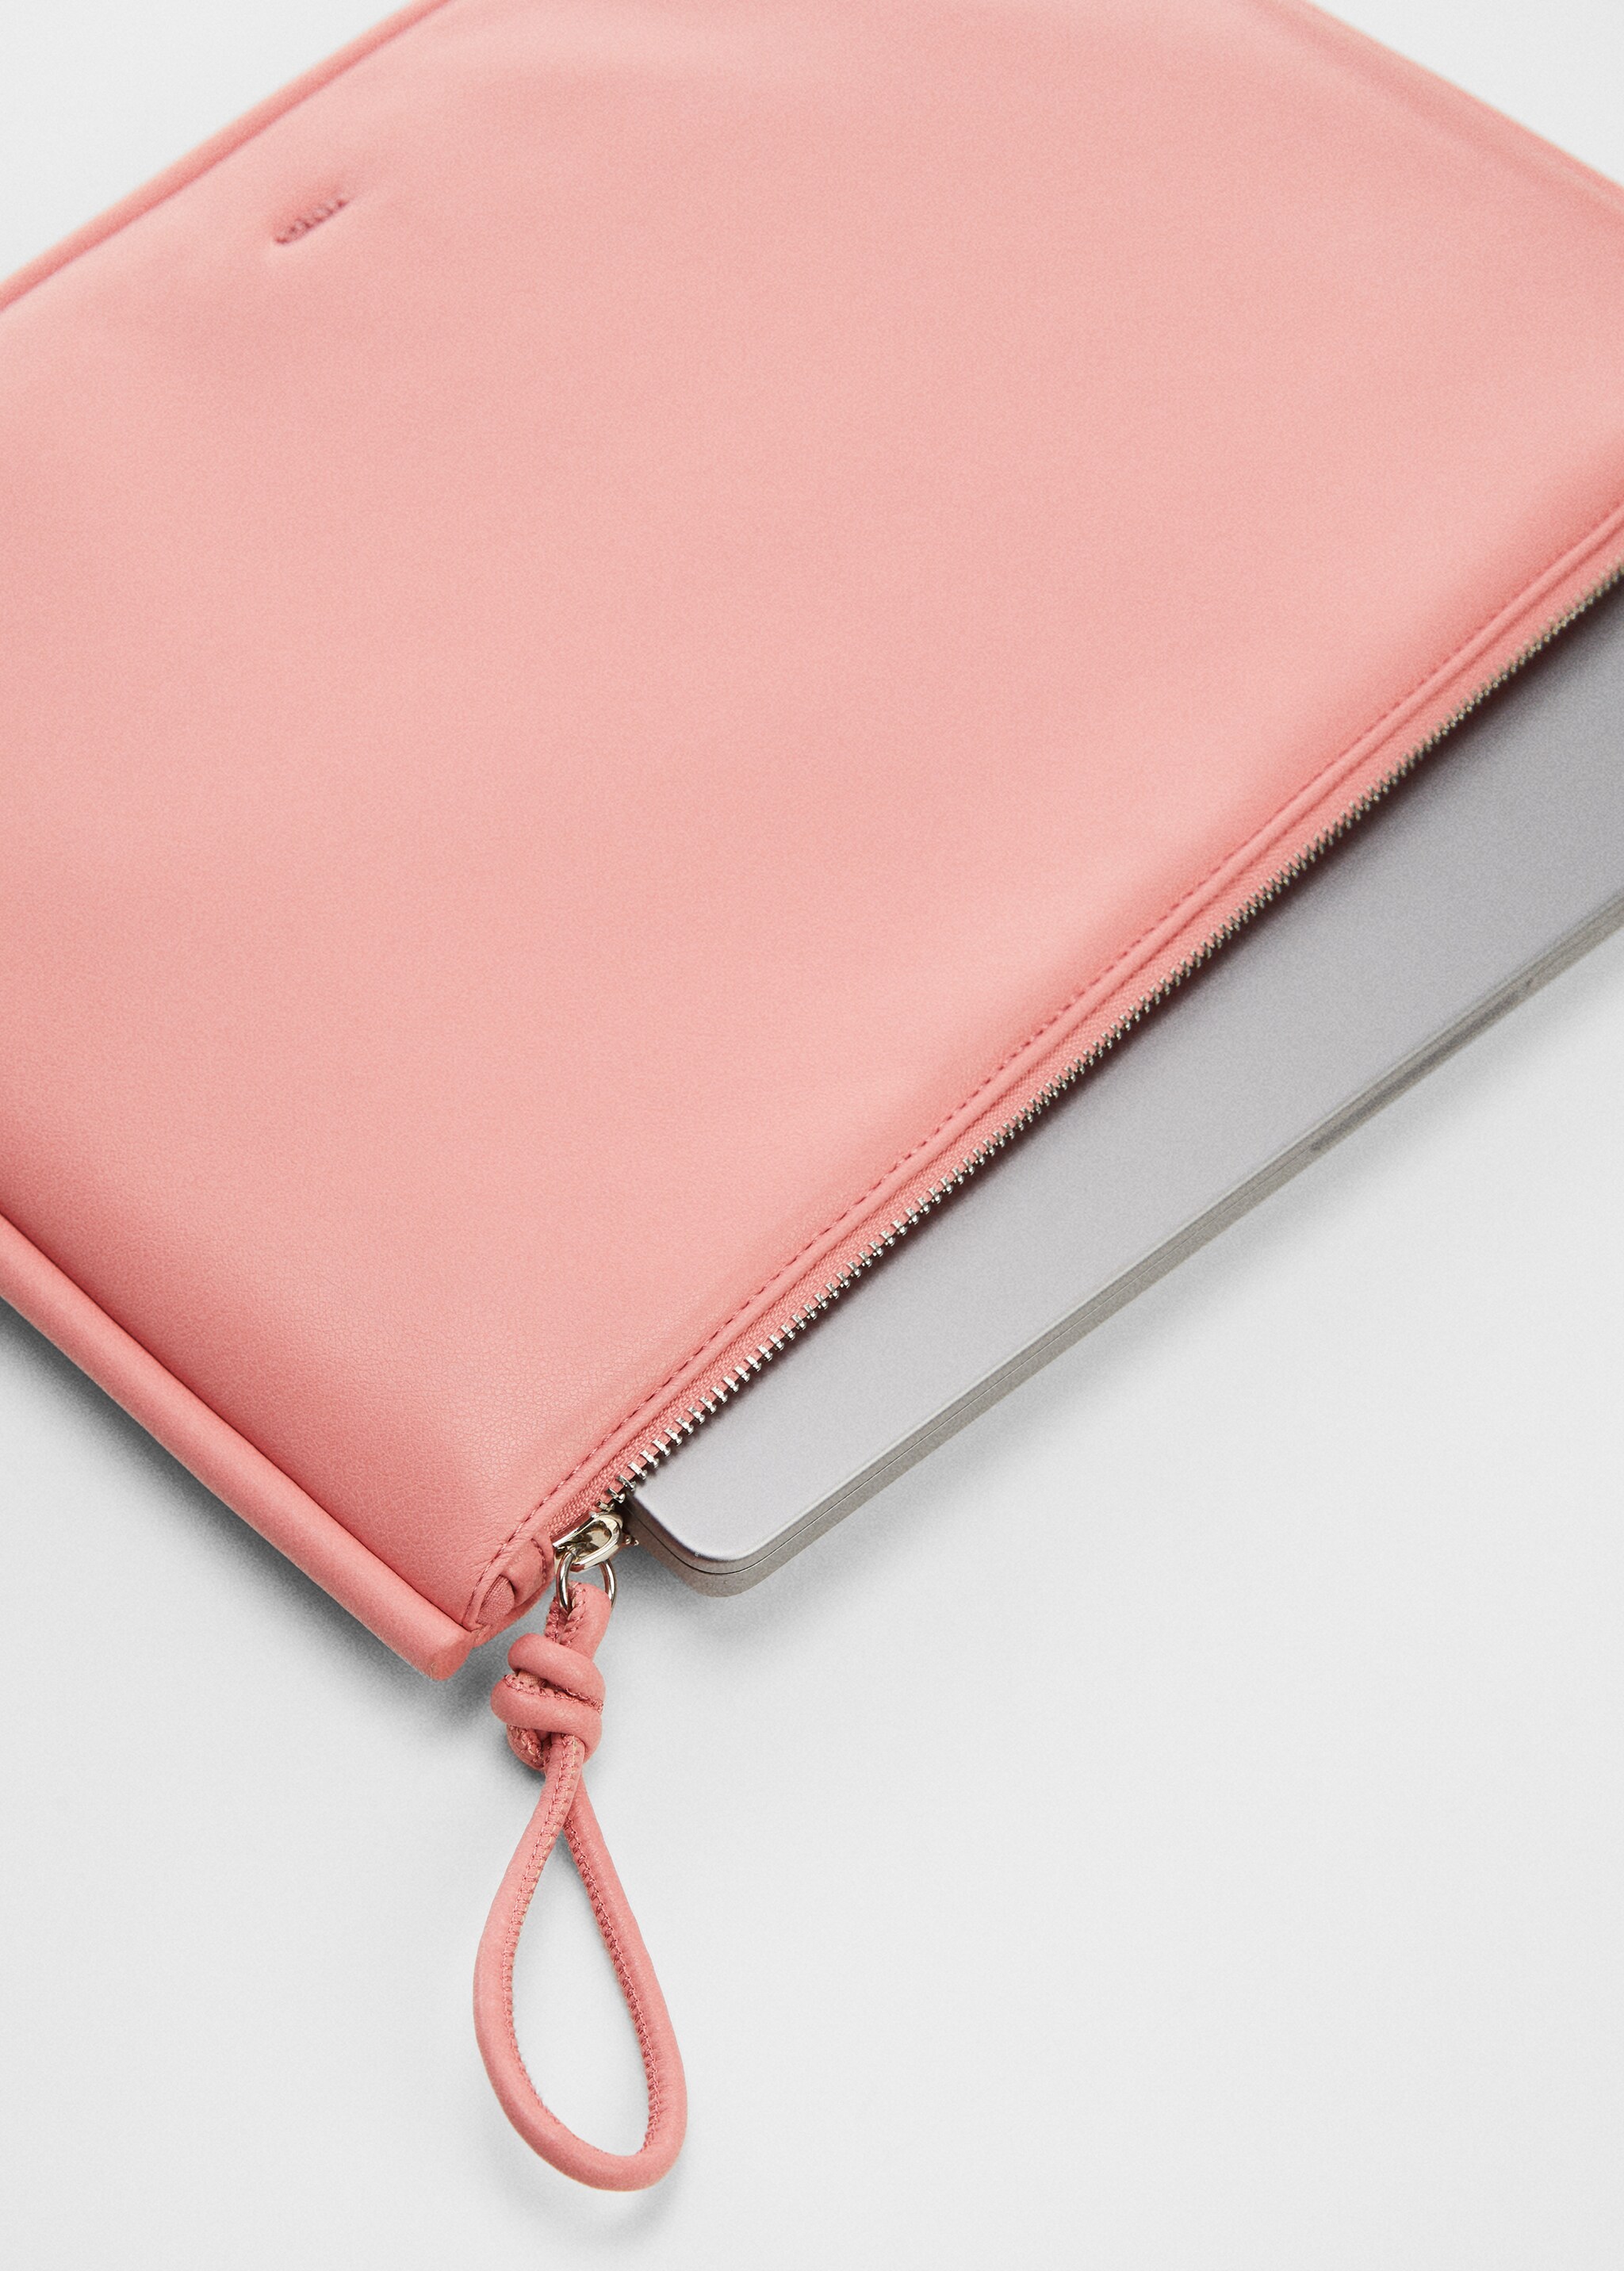 Padded laptop case - Details of the article 2